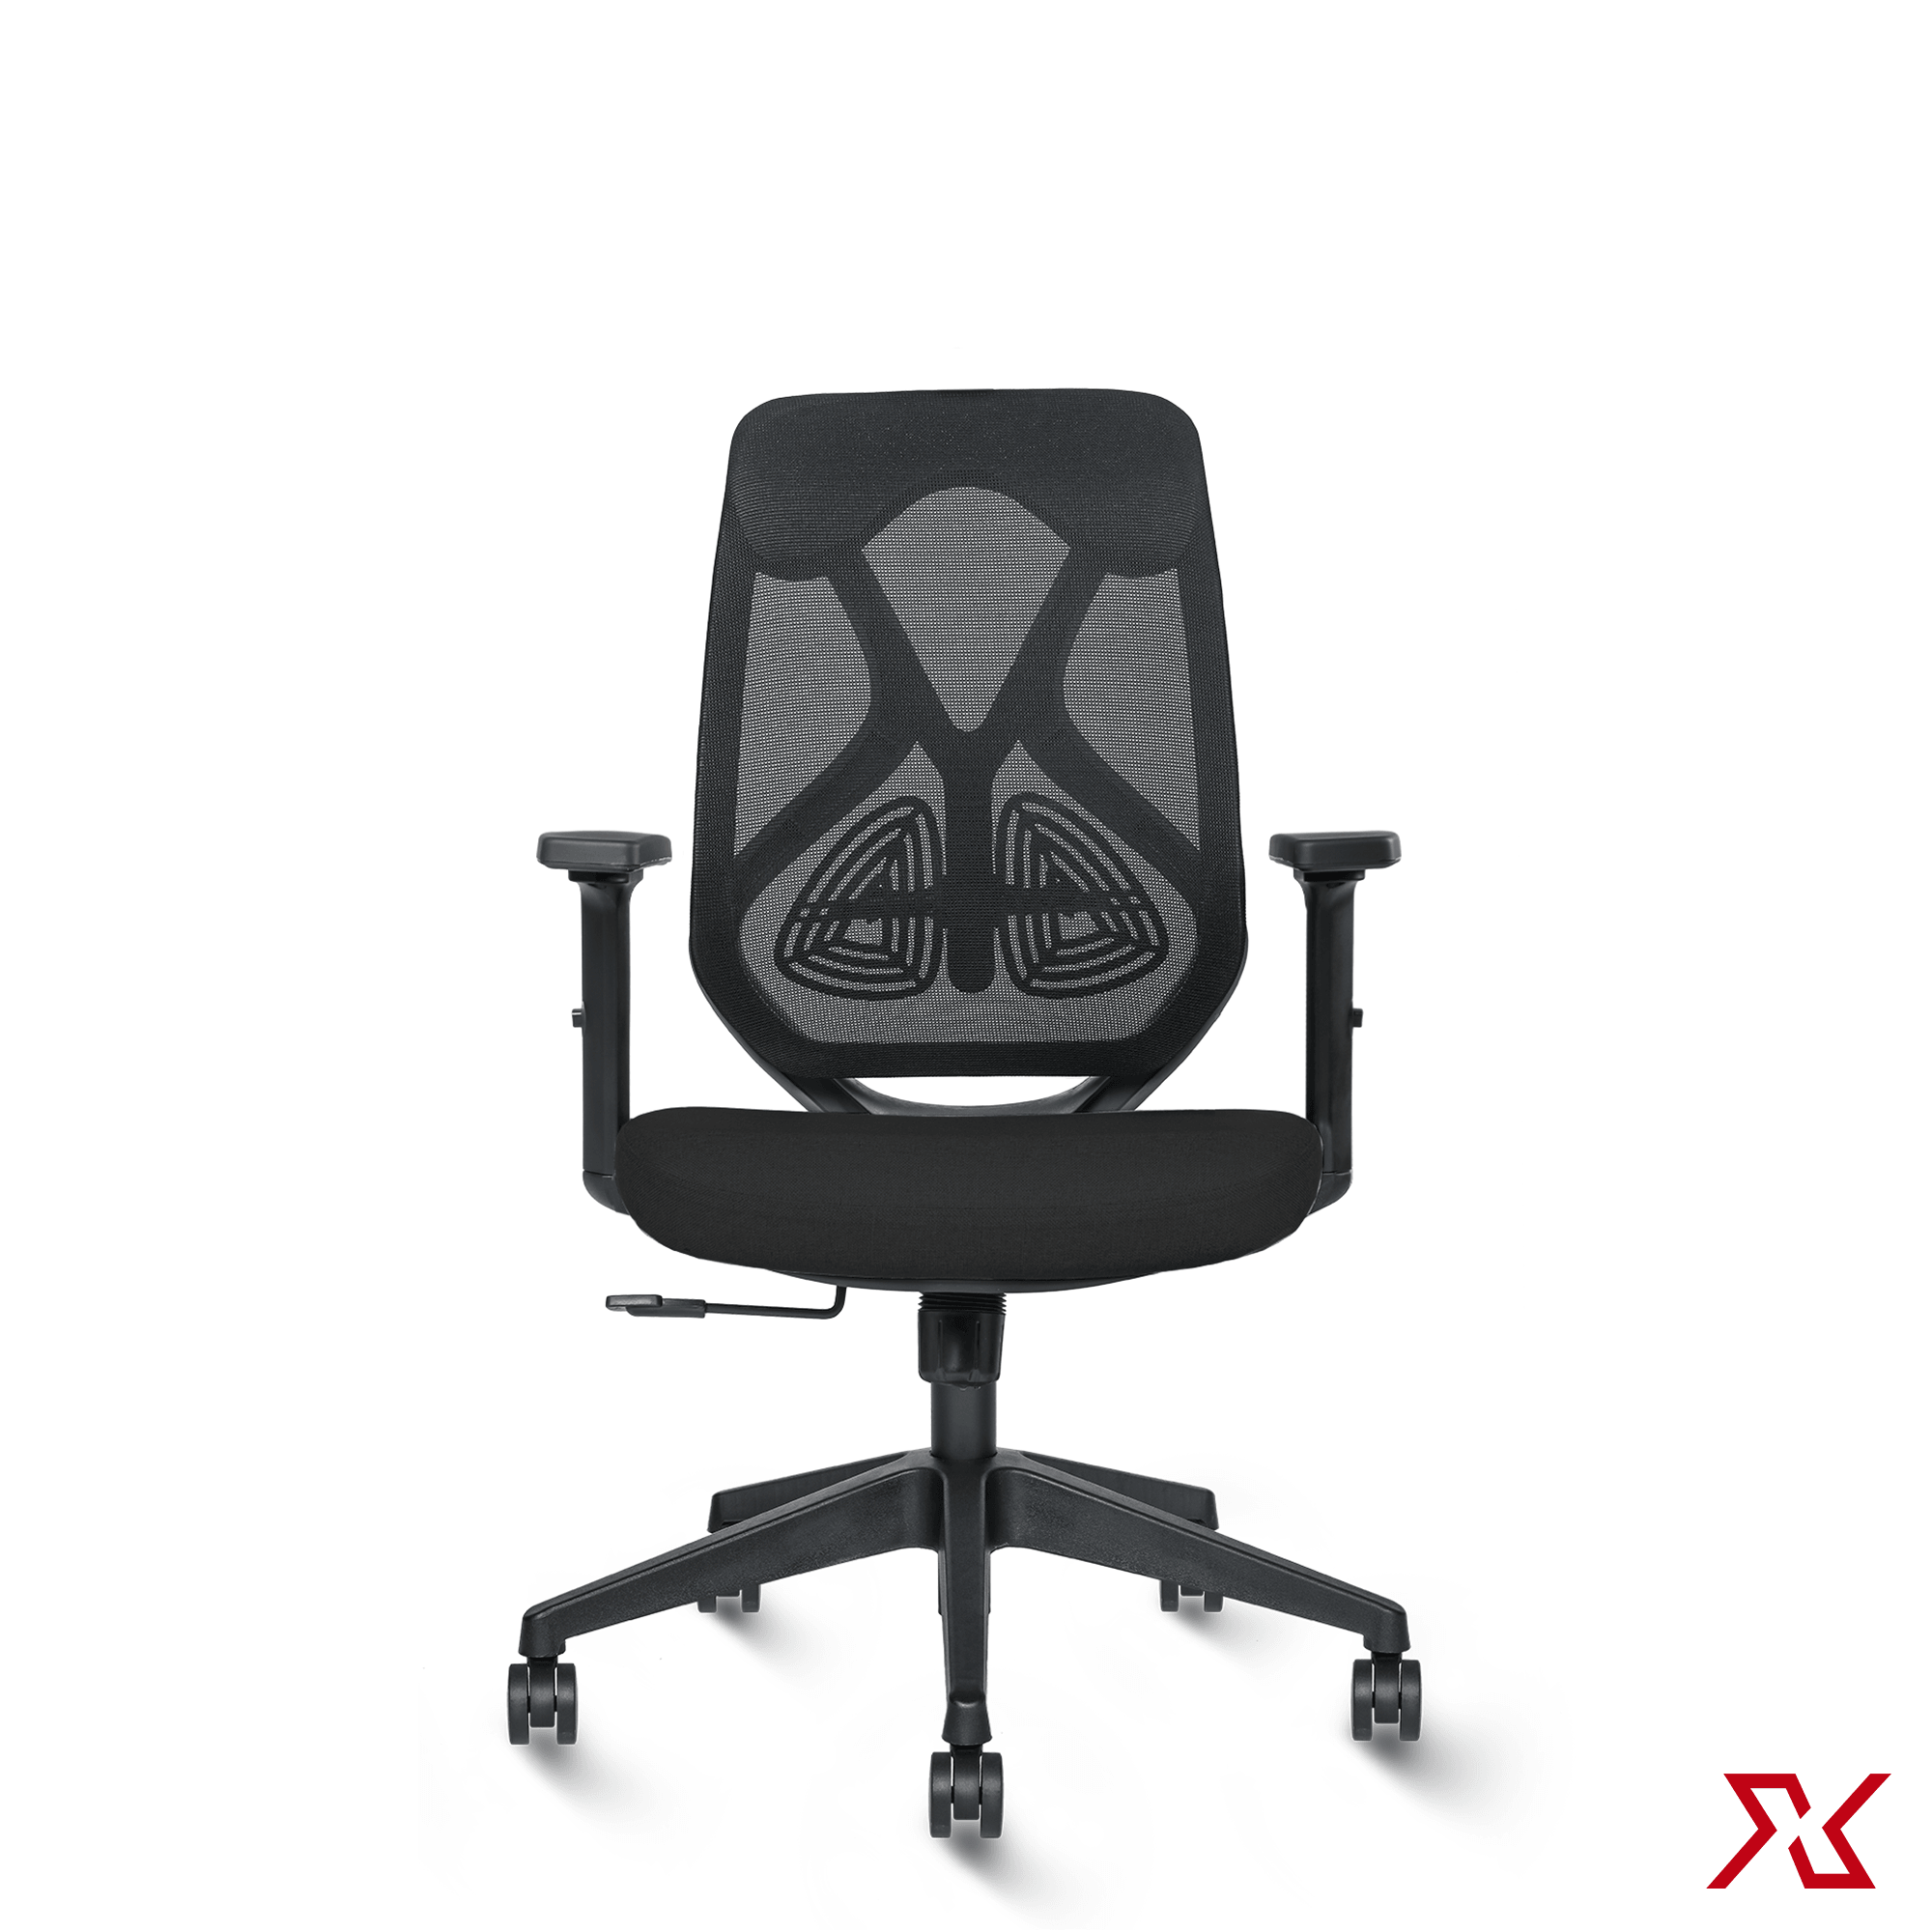 ZEN Medium Back LX (Black Chair) – Exclusiff Seating Sytems